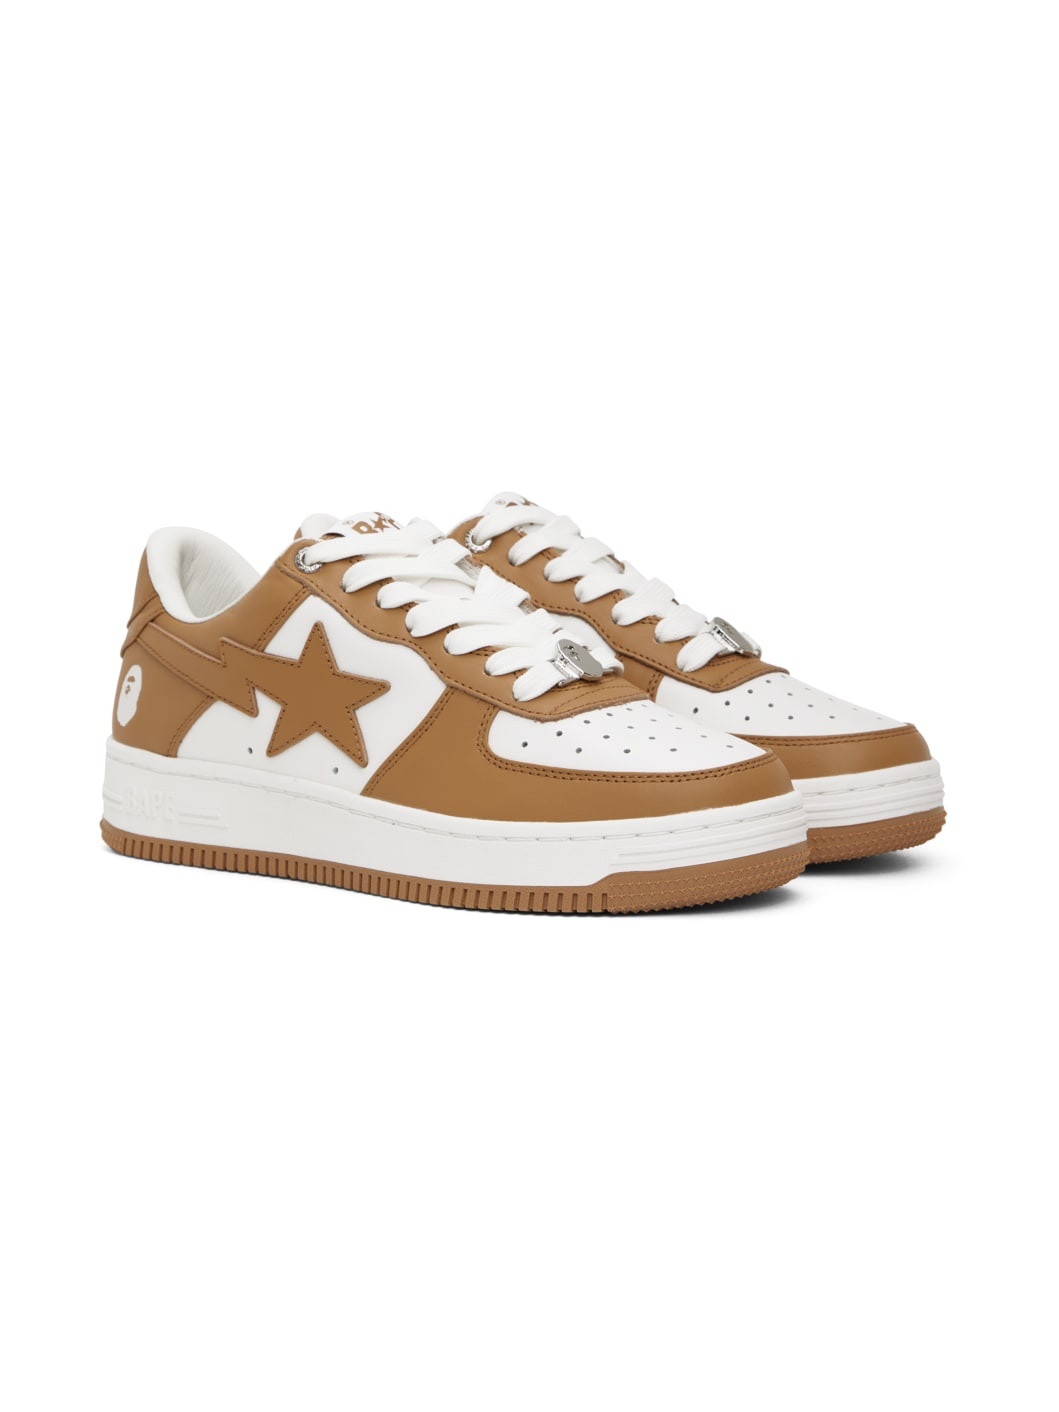 Brown & White Sta #4 Sneakers - 4